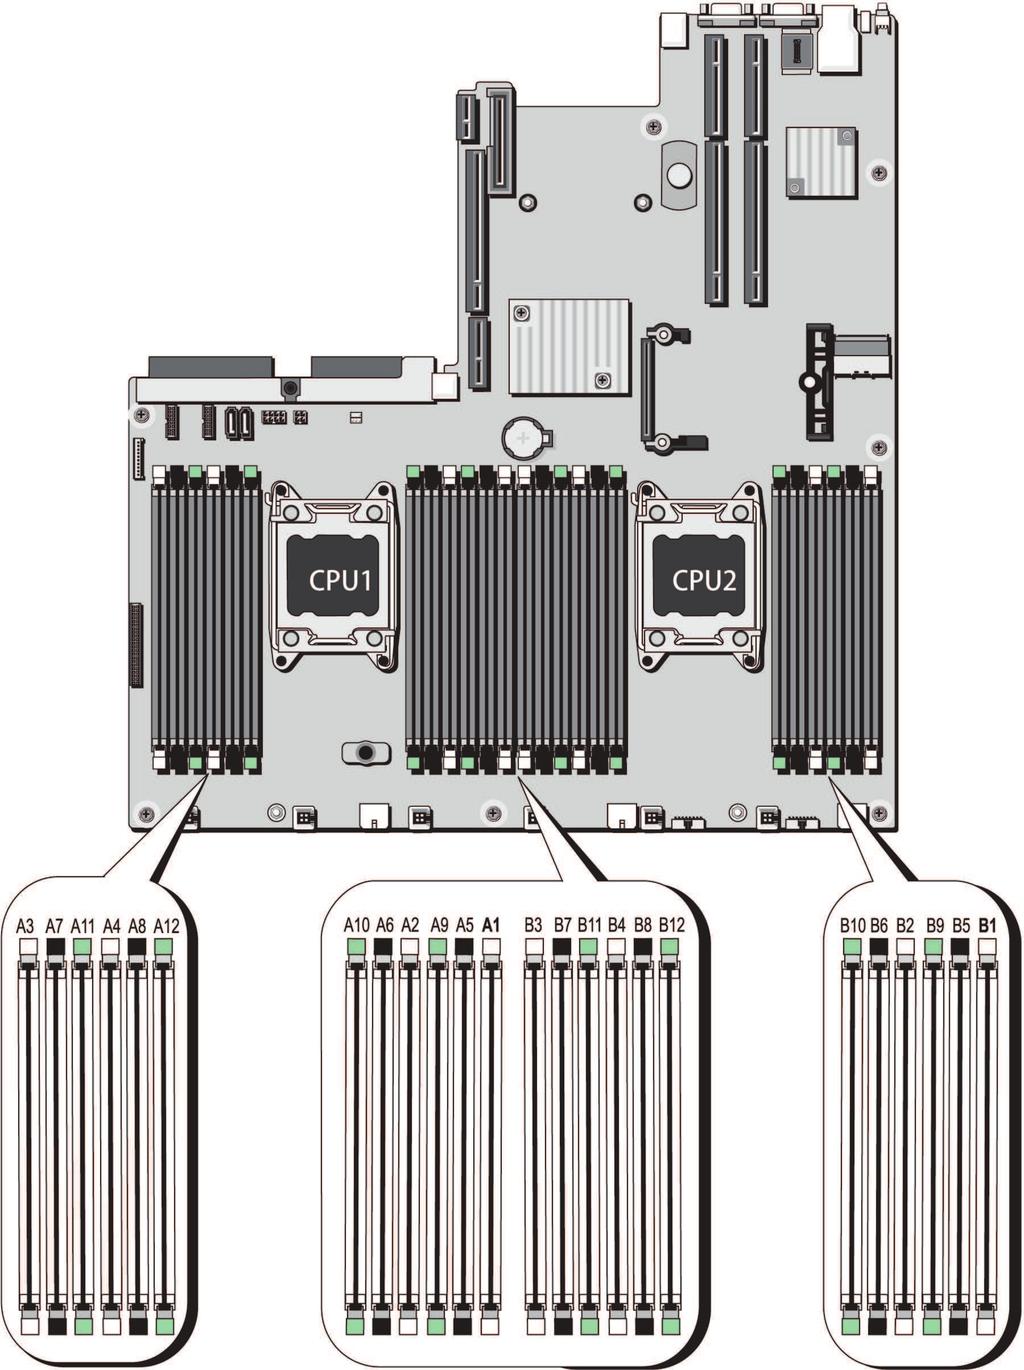 Installing Components in the Node DXi4700 Configuration Total System Memory Actions to Take 117-135 TB 128 GB 1. Remove the pre-installed modules in slots A1 A4 and B1 B4 (white sockets). 2.